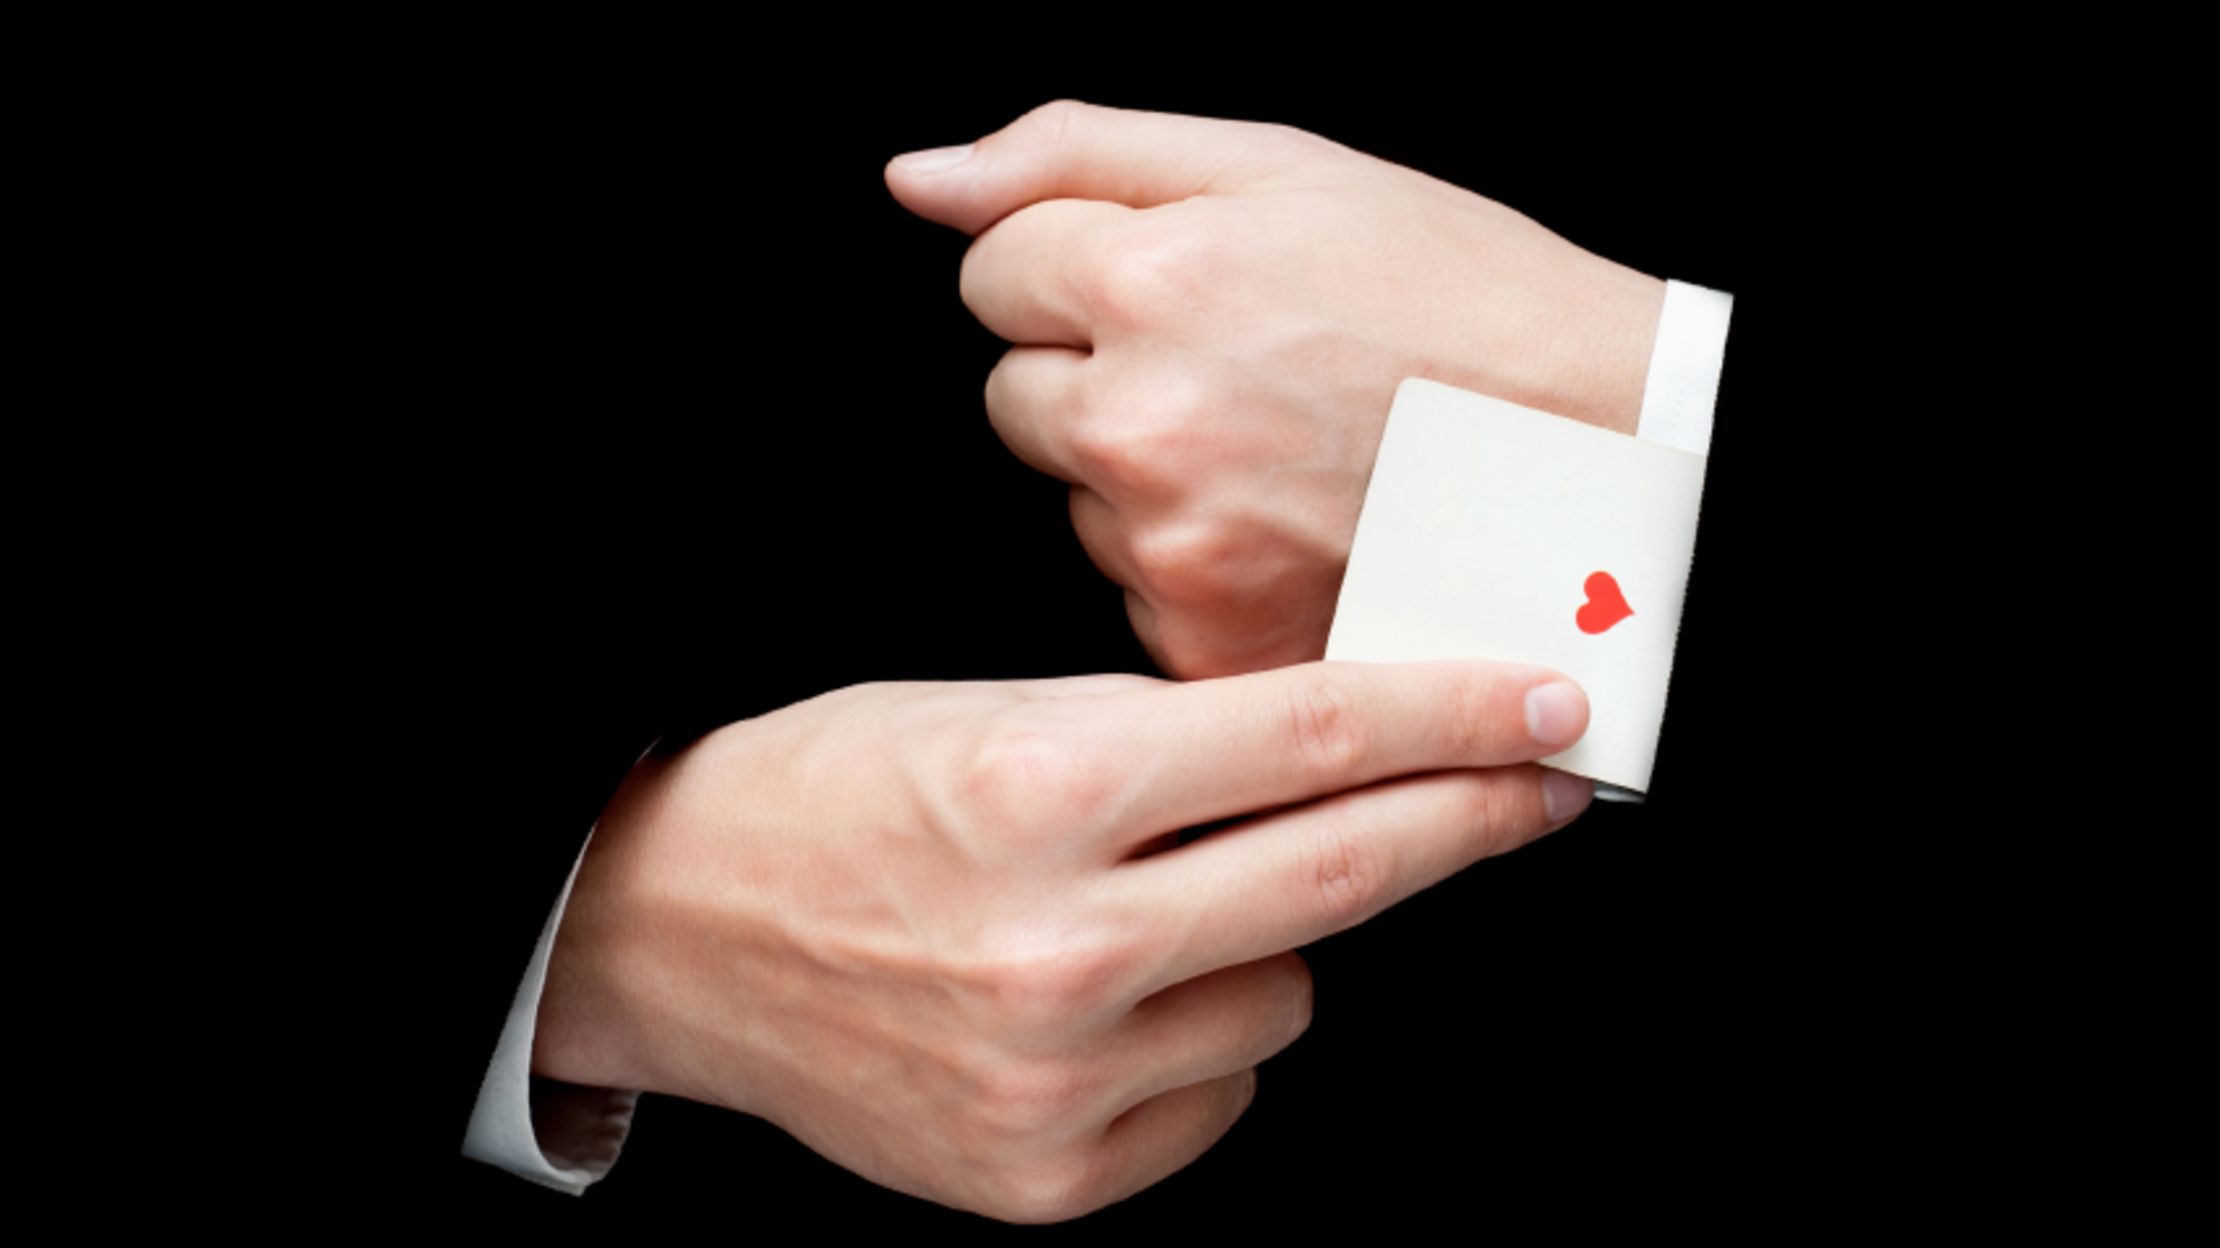 15 Magic Tricks You Didn't Know You Could Do | Mental Floss